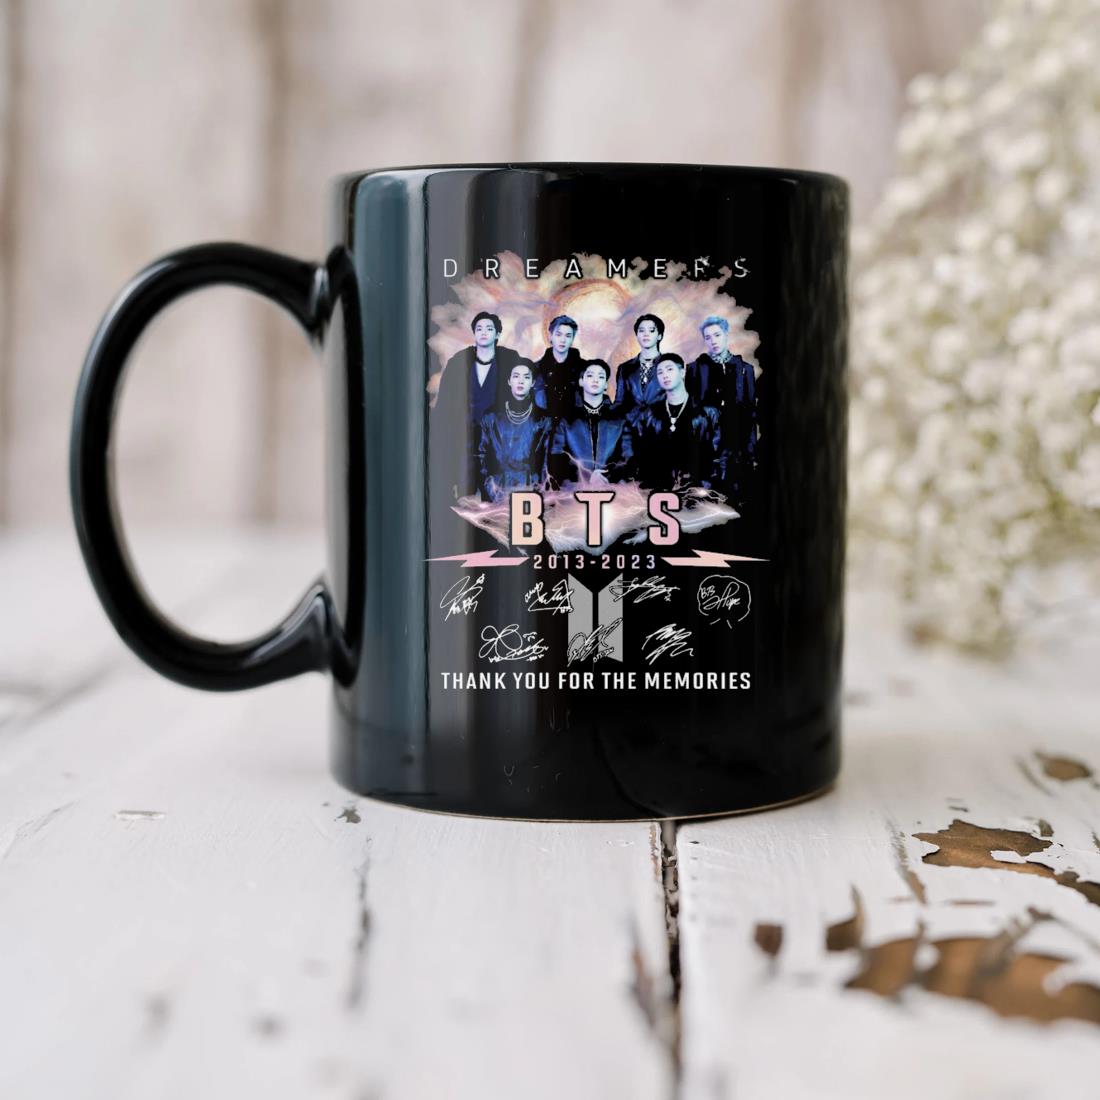 Dreamers Bts 2013-2023 Thank You For The Memories Signatures Mug